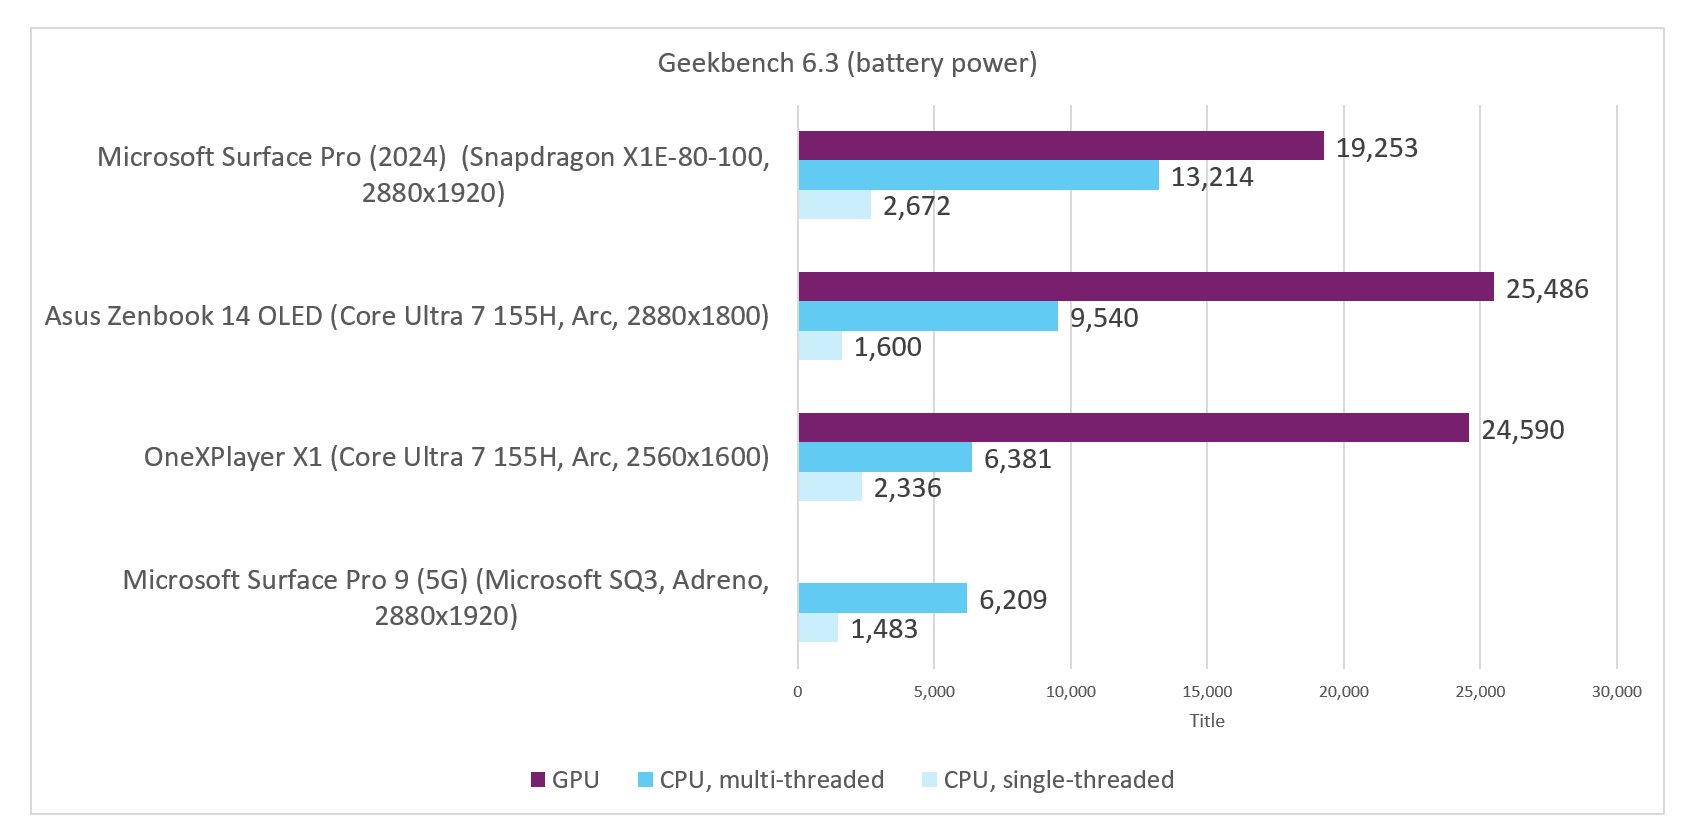 Microsoft Surface Pro 2024 11th Edition Geekbench battery power